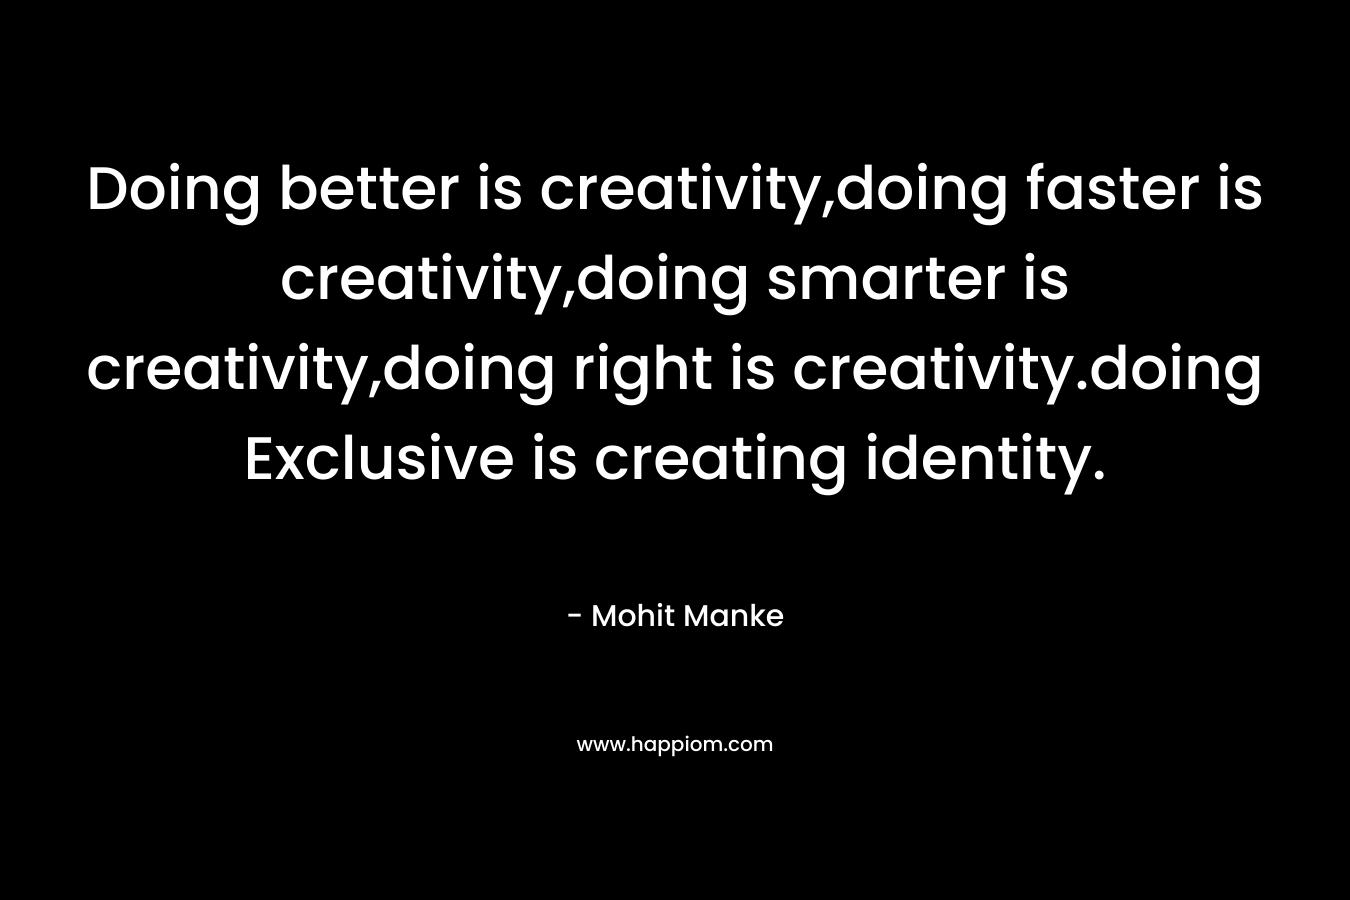 Doing better is creativity,doing faster is creativity,doing smarter is creativity,doing right is creativity.doing Exclusive is creating identity.